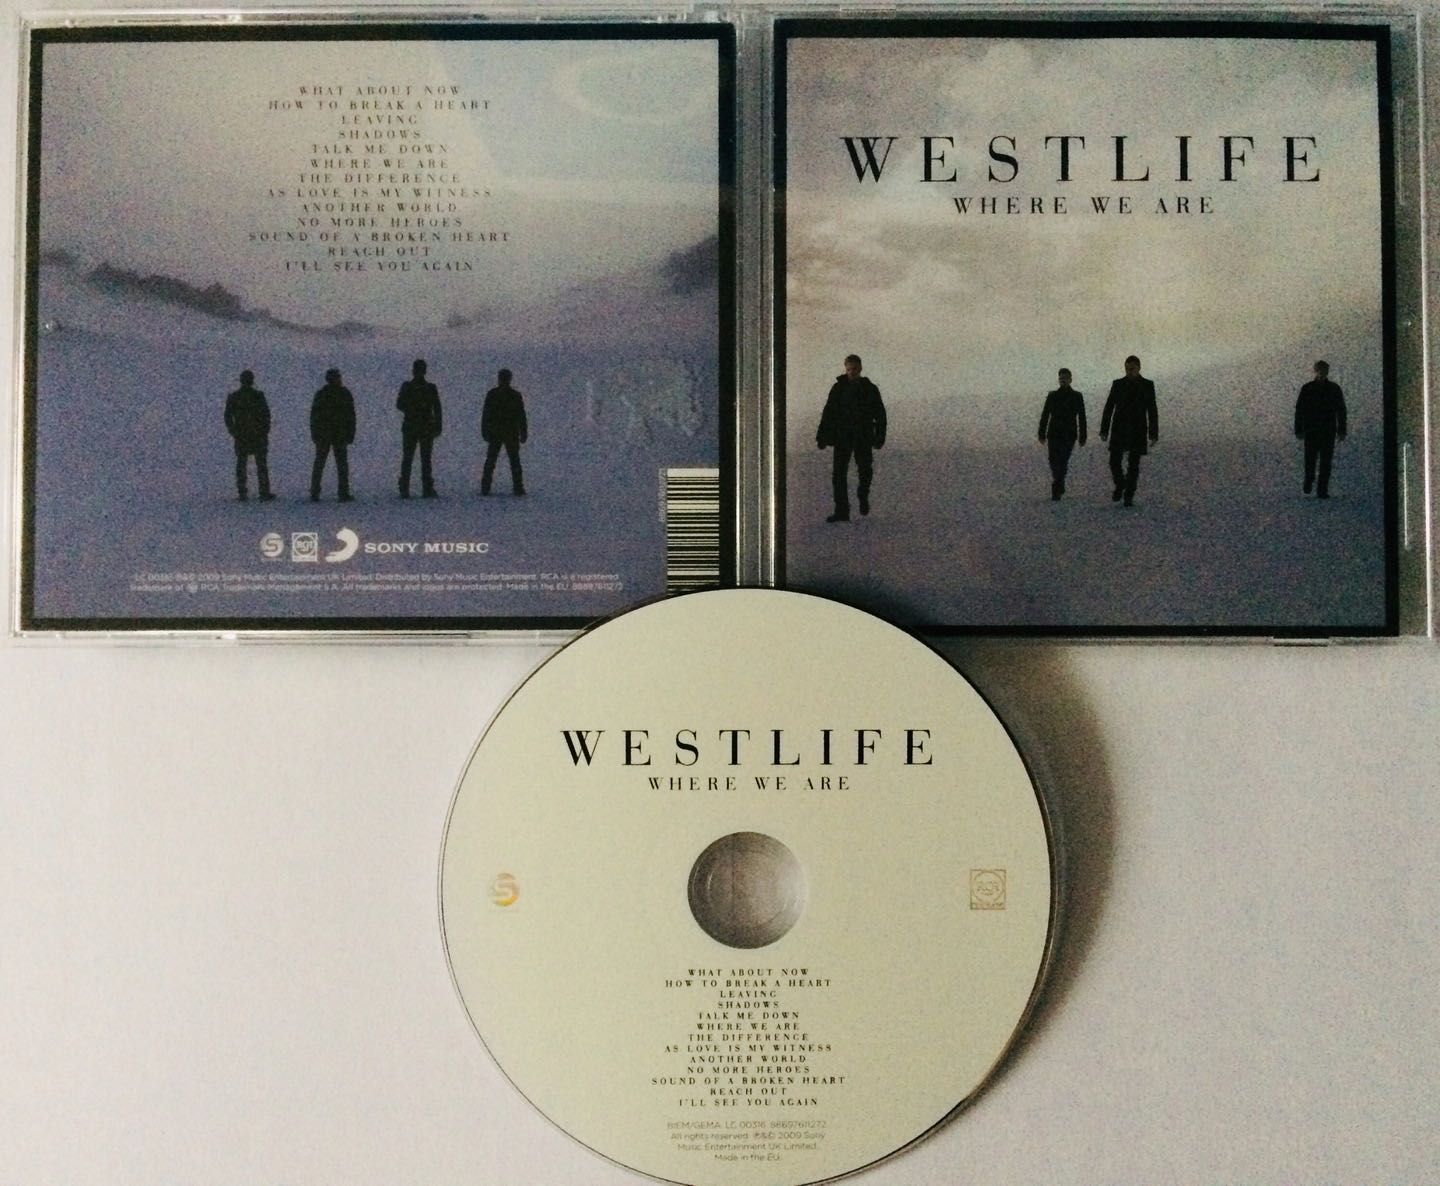 Westlife - Where we are (CD)